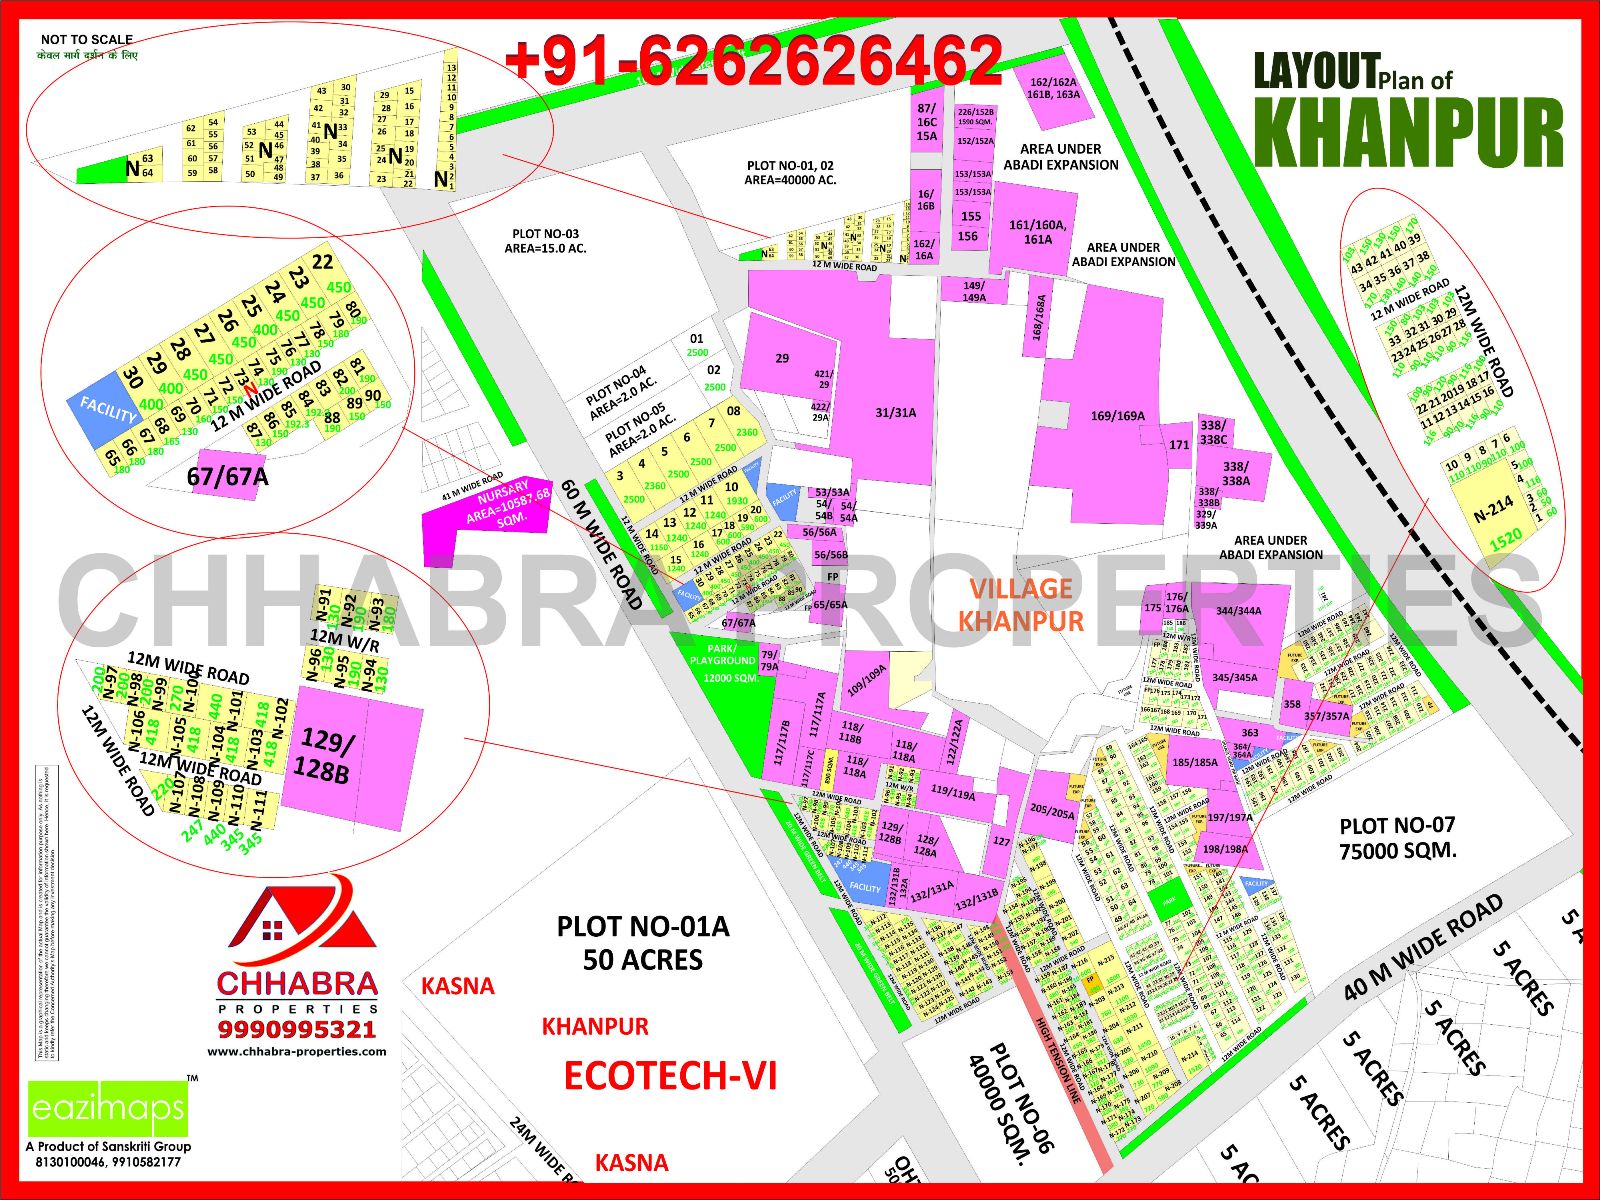 layout plan for khanpur hd map